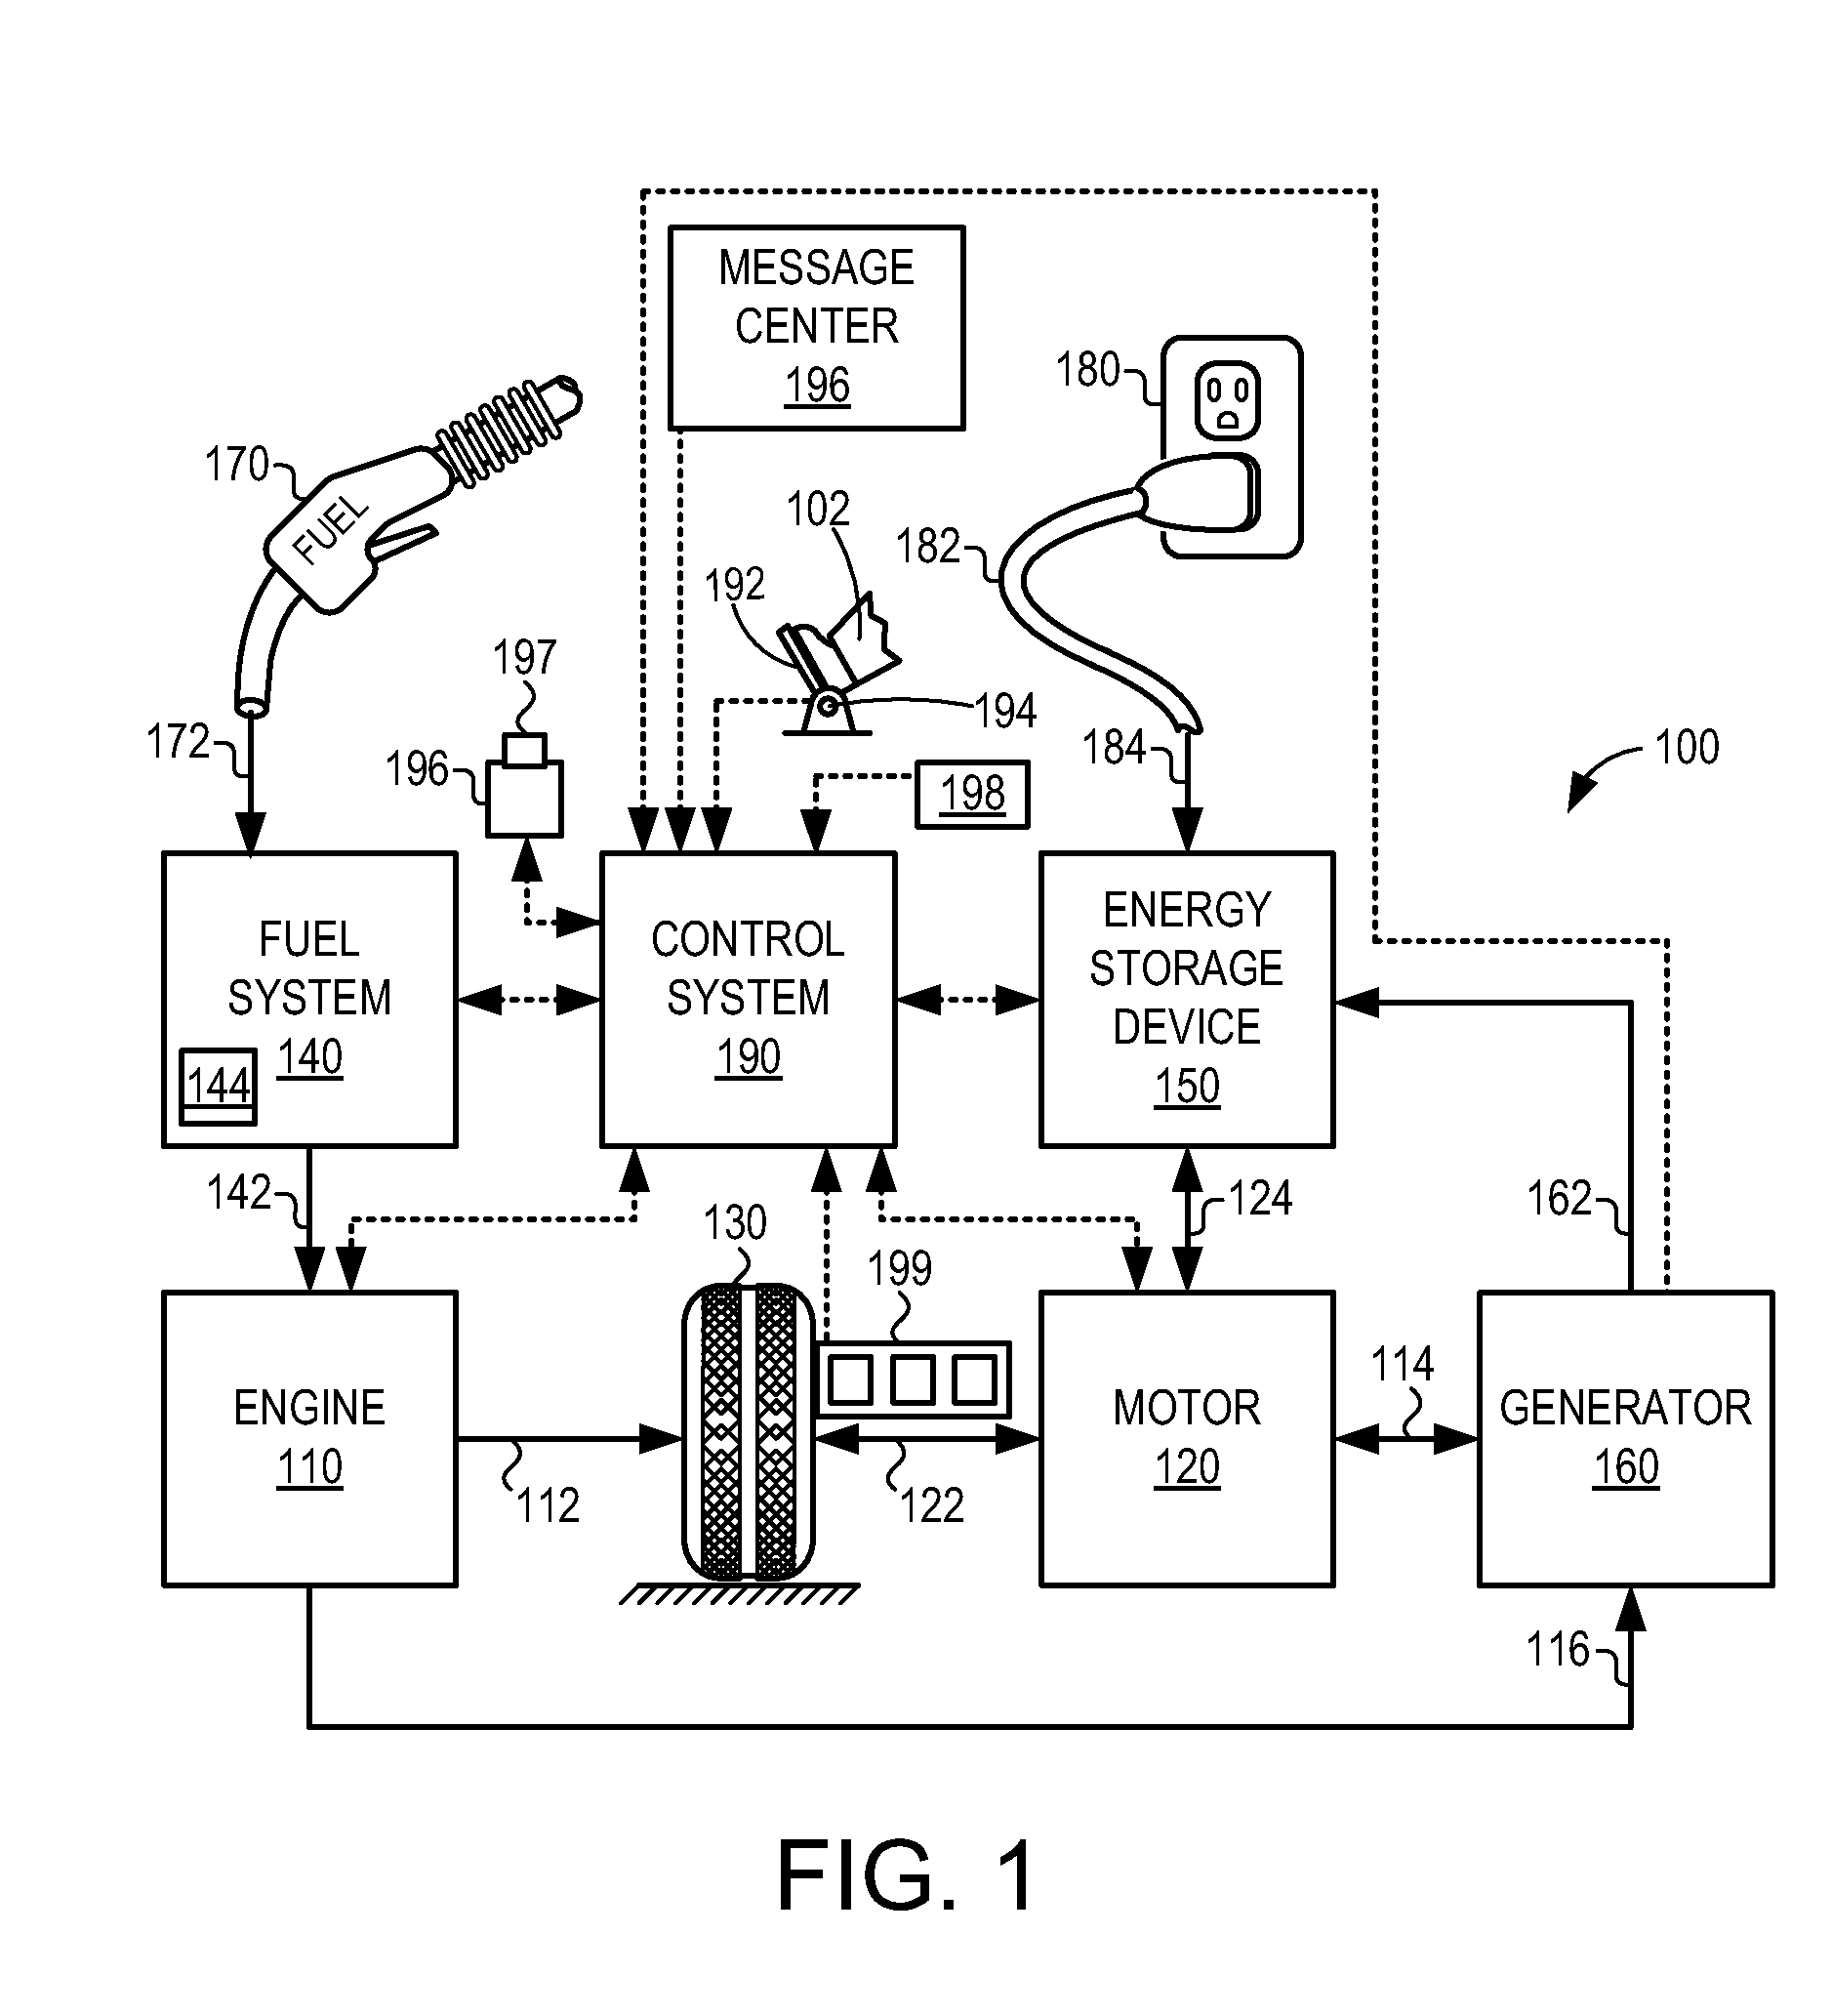 System and methods for refueling a vehicle